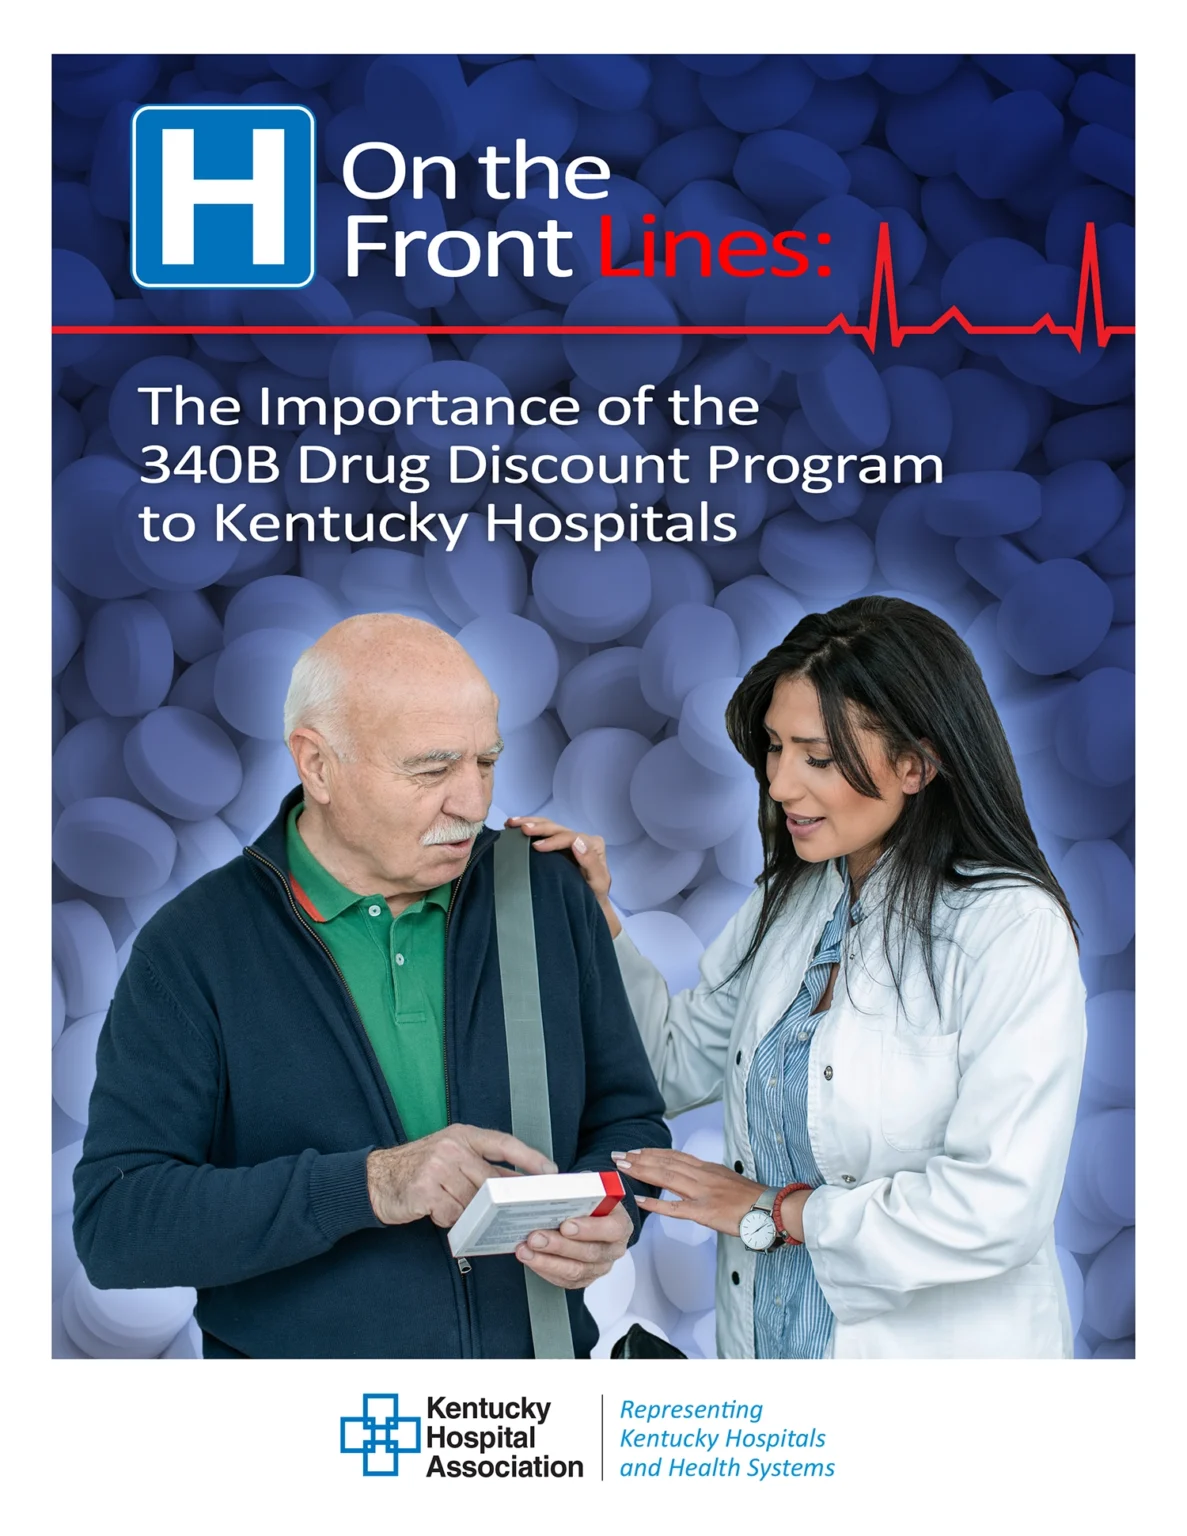 The Importance of the 340B Drug Discount Program to Kentucky Hospitals one-sheet